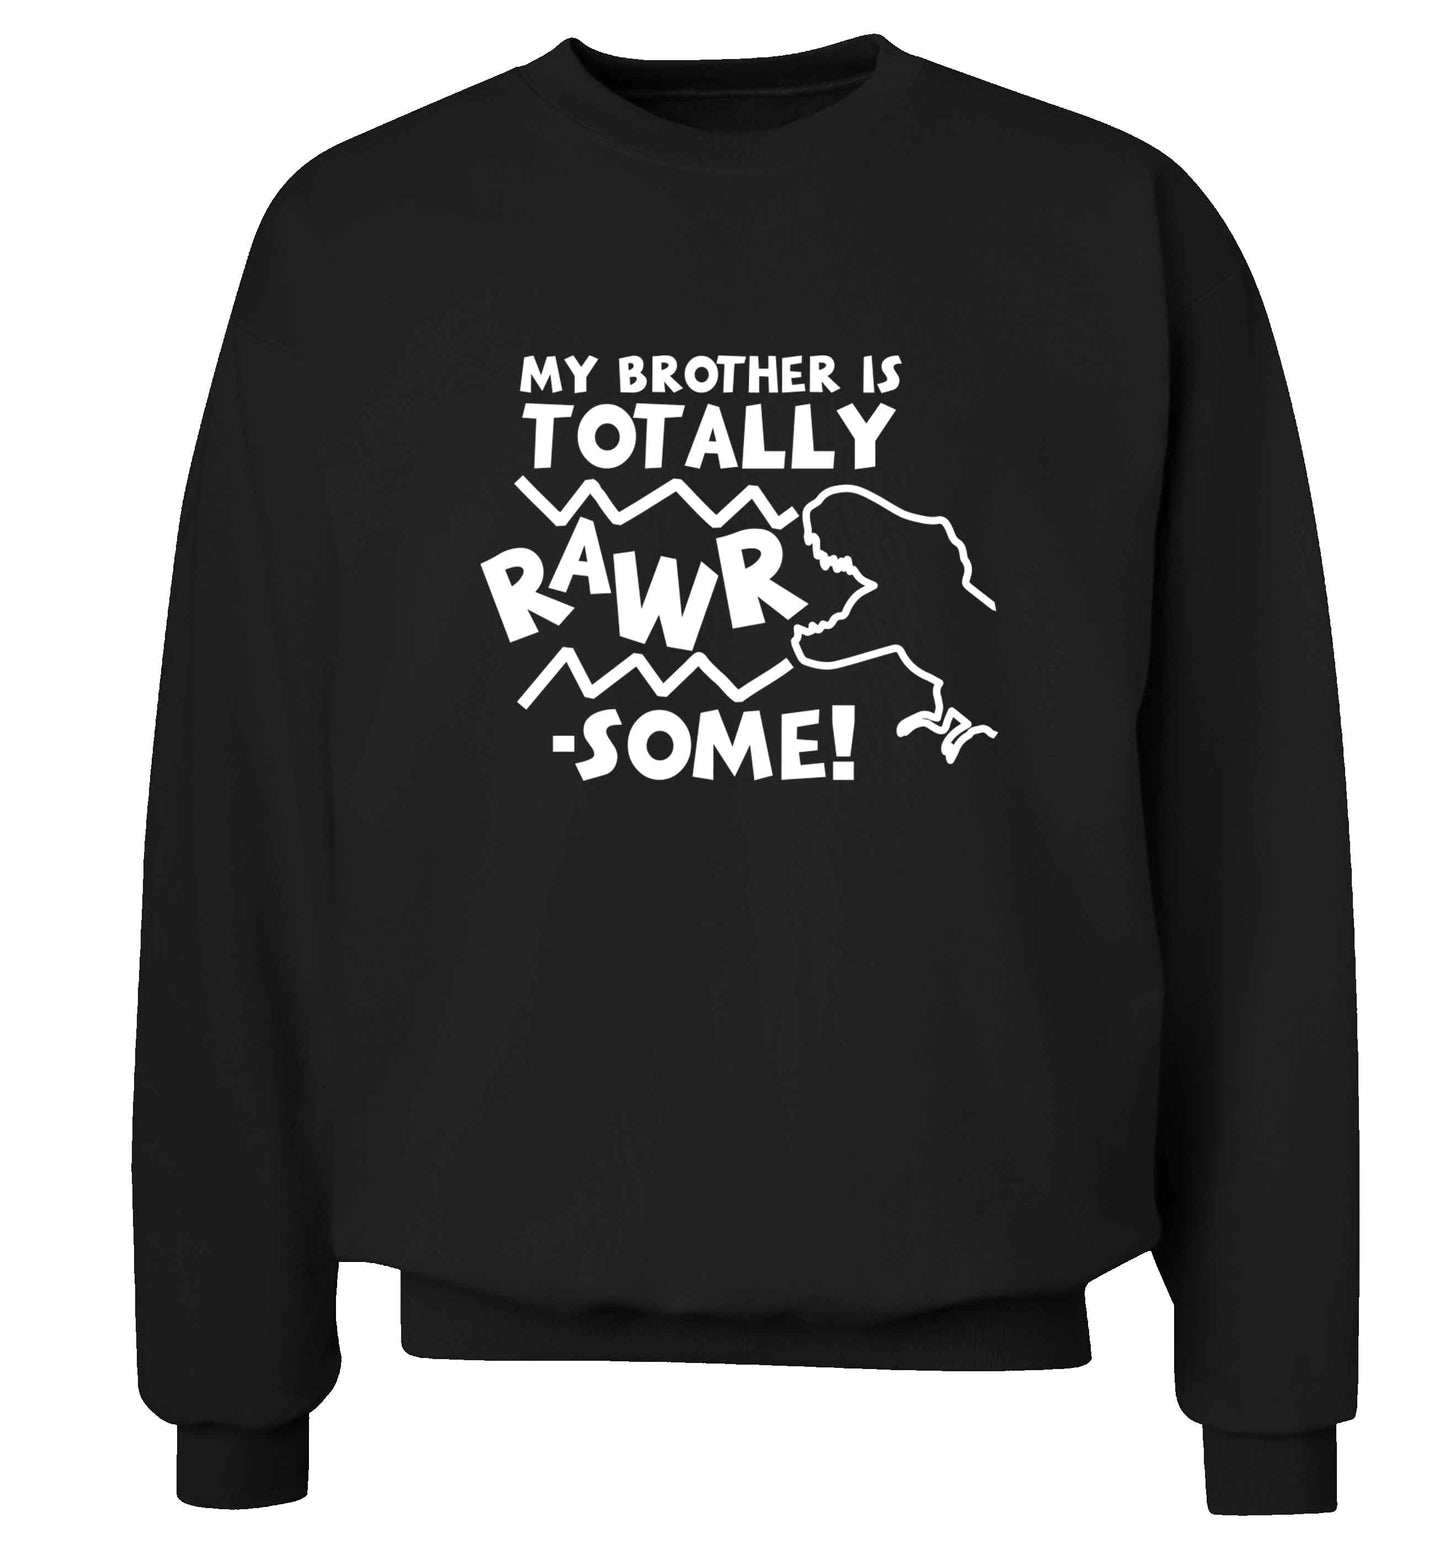 My brother is totally rawrsome adult's unisex black sweater 2XL